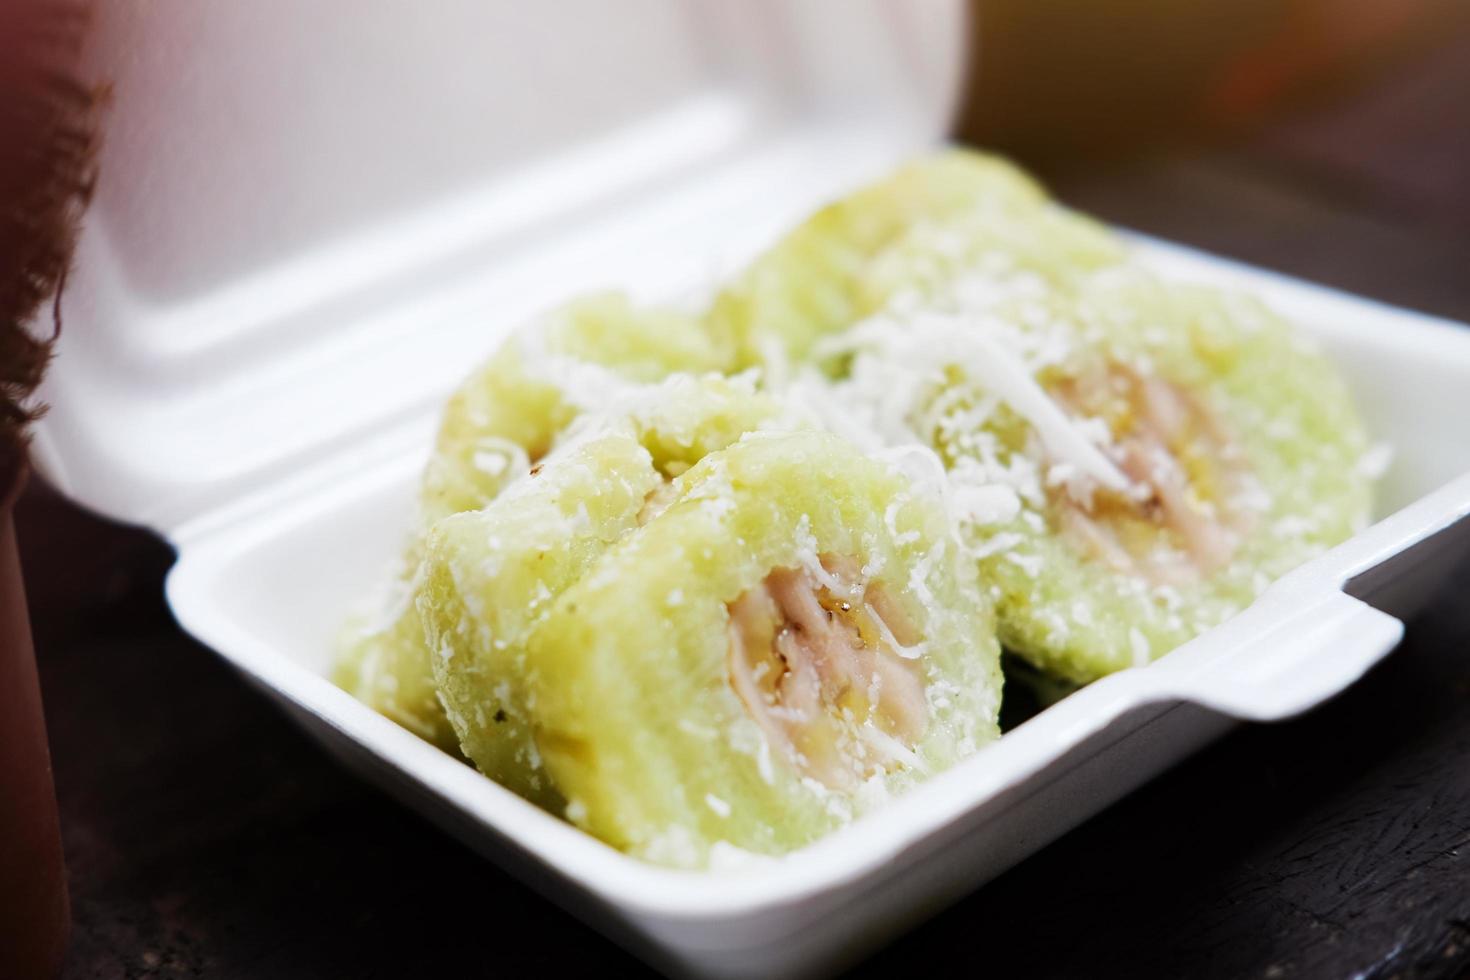 Thai sweet Dessert, Banana in steamed Sticky Rice pieces on white Foam box photo